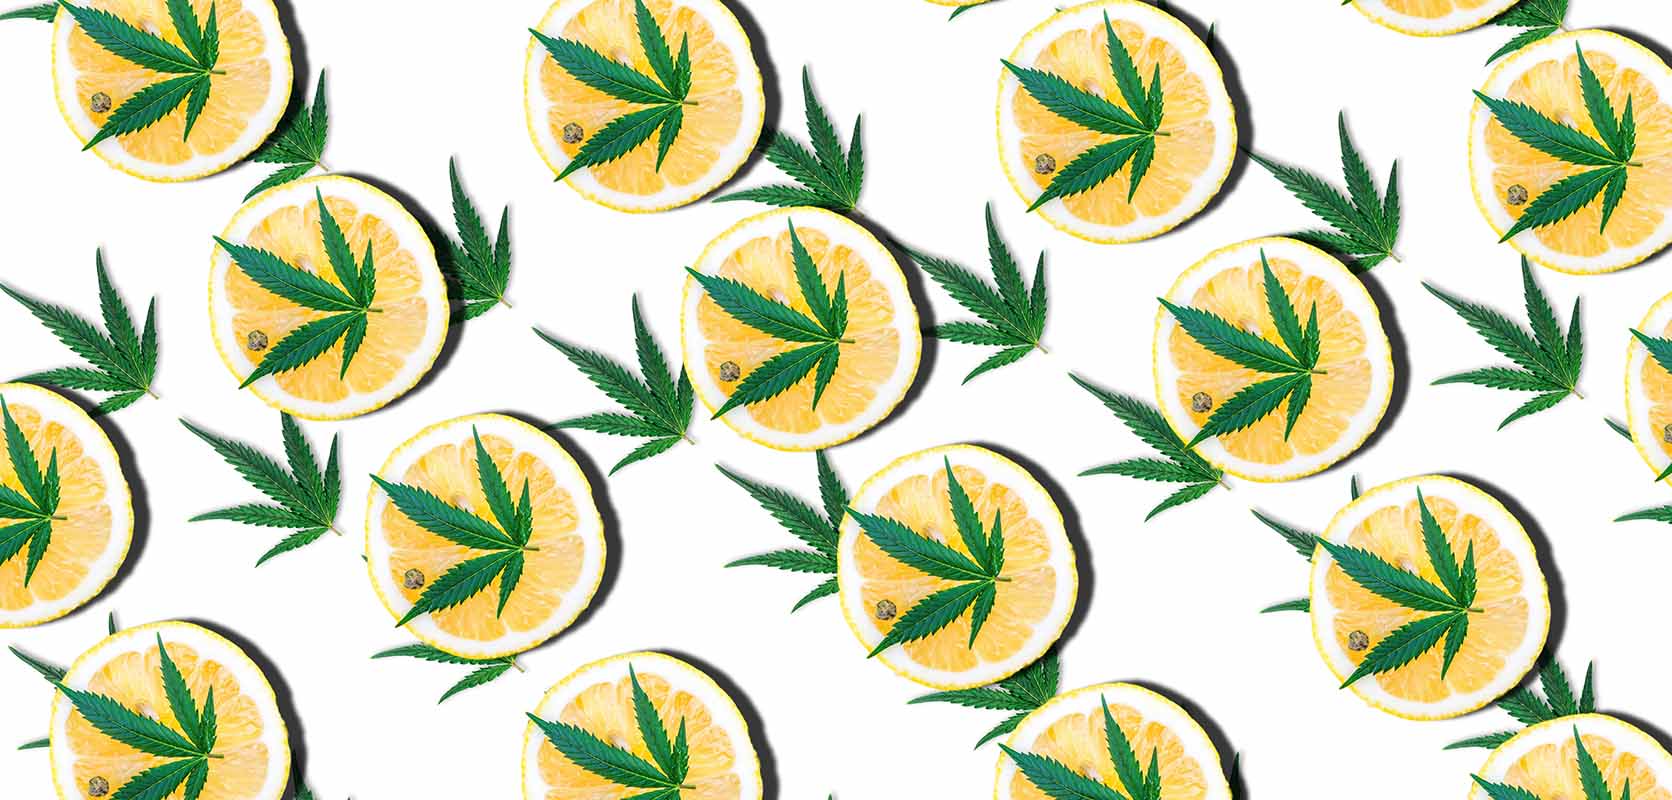 Lemons with cannabis leaves. Terpenes concept. What Does HTFSE Mean?